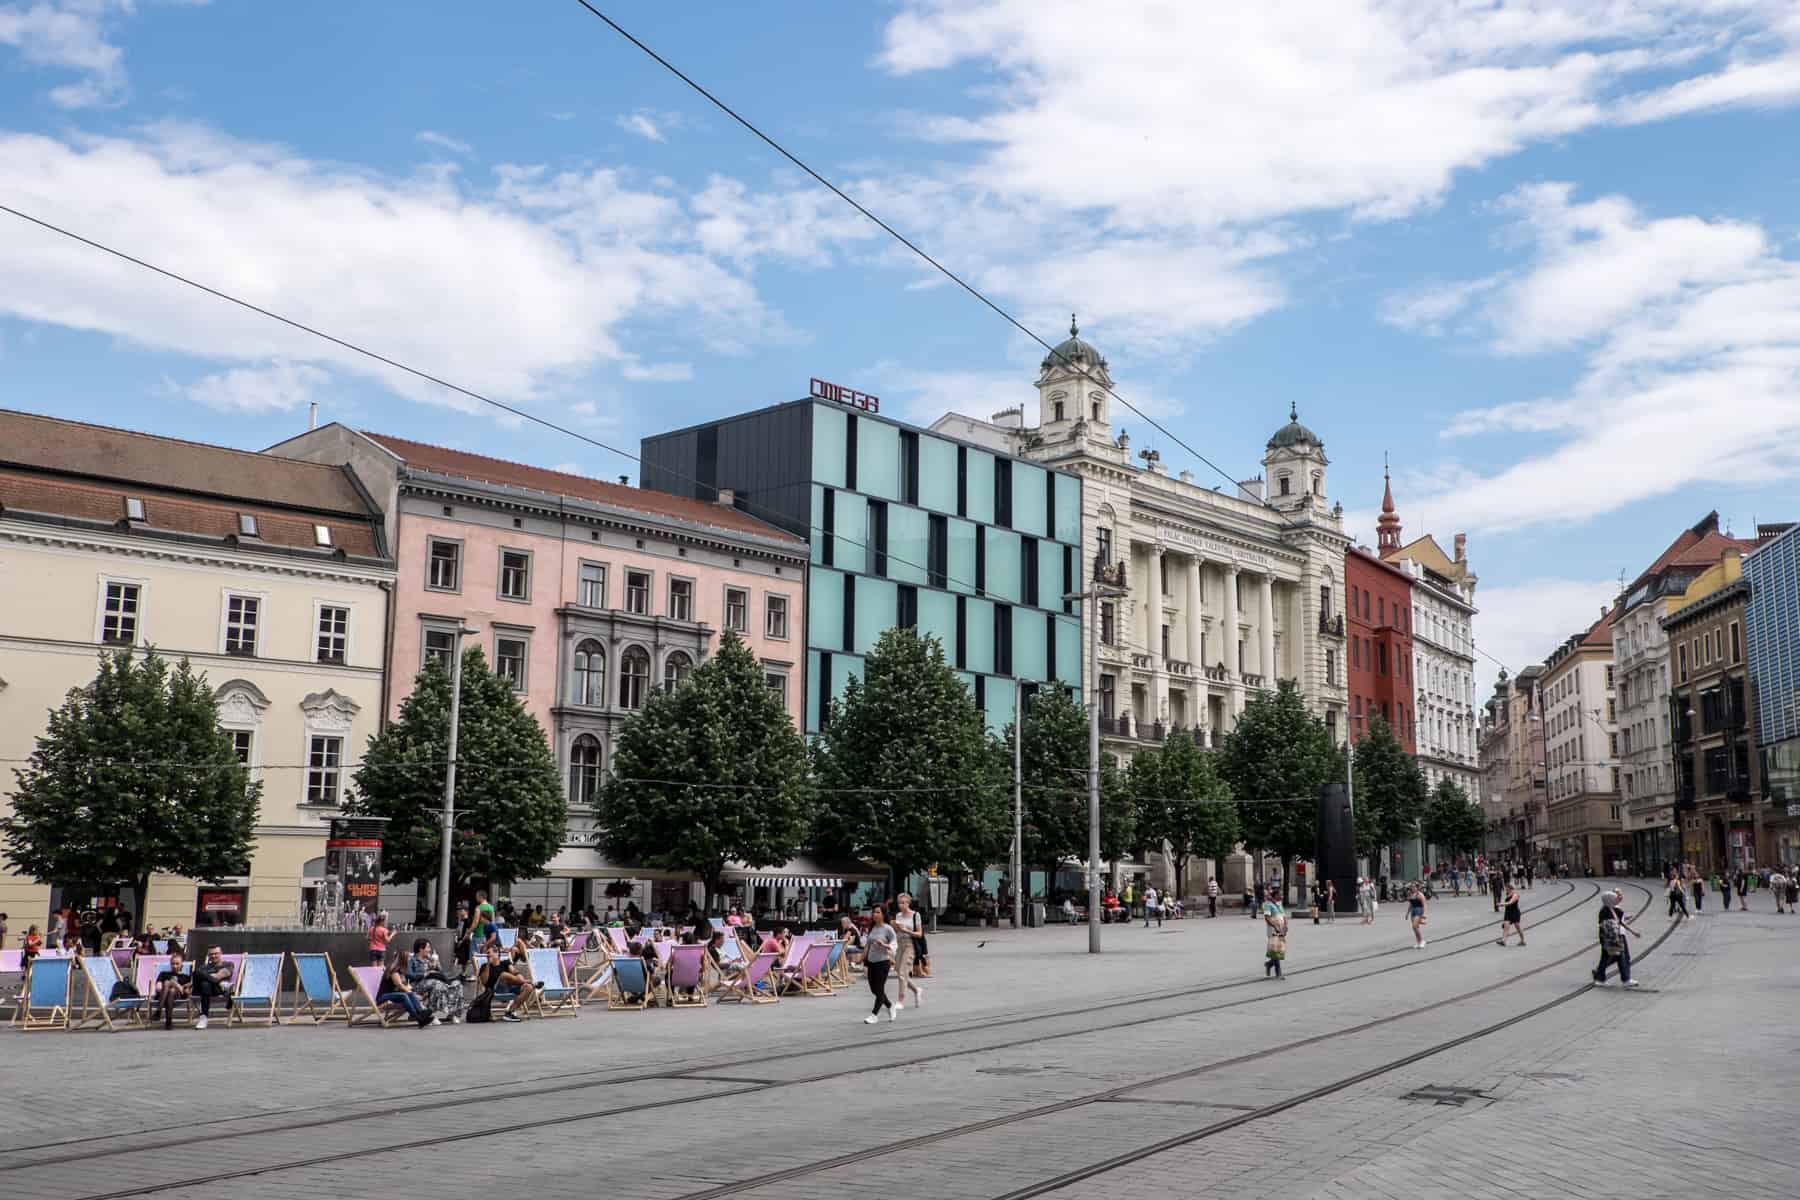 In Brno city, a green functionalist building with the words OMEGA on the roof, wedged between more classic beige, pink and white buildings. People lounge in deck chairs in front. 